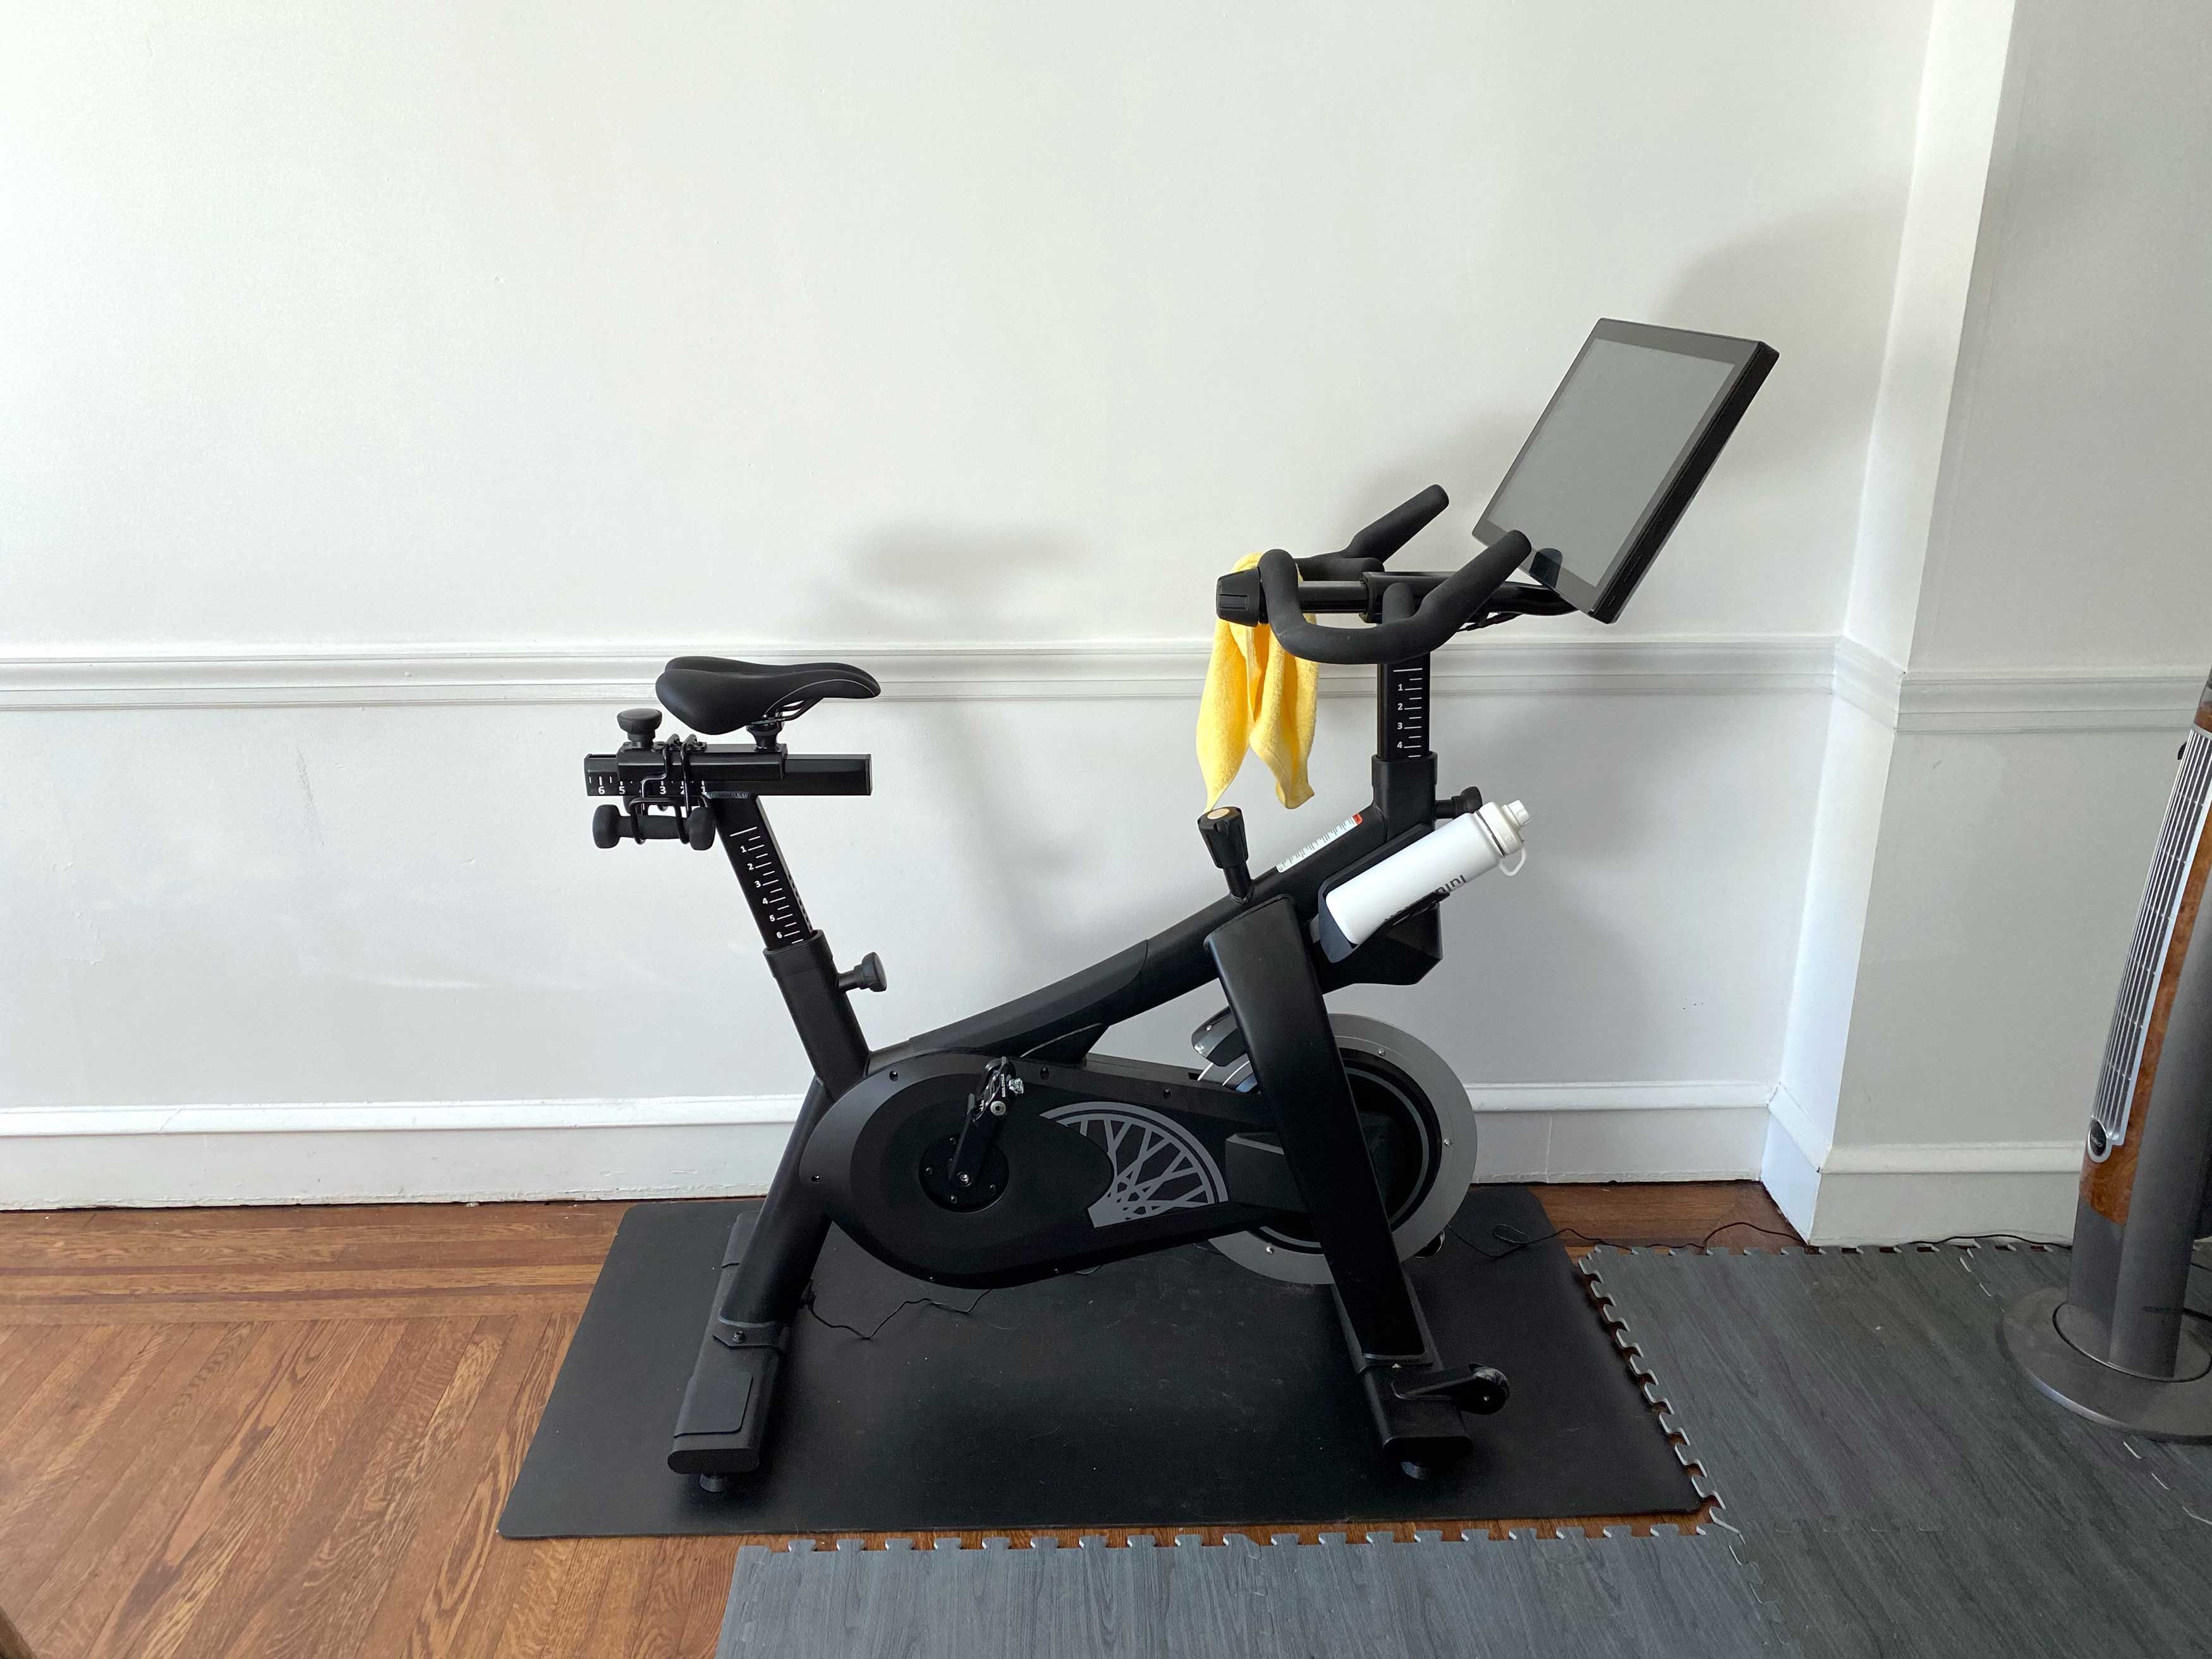 soulcycle bike purchase